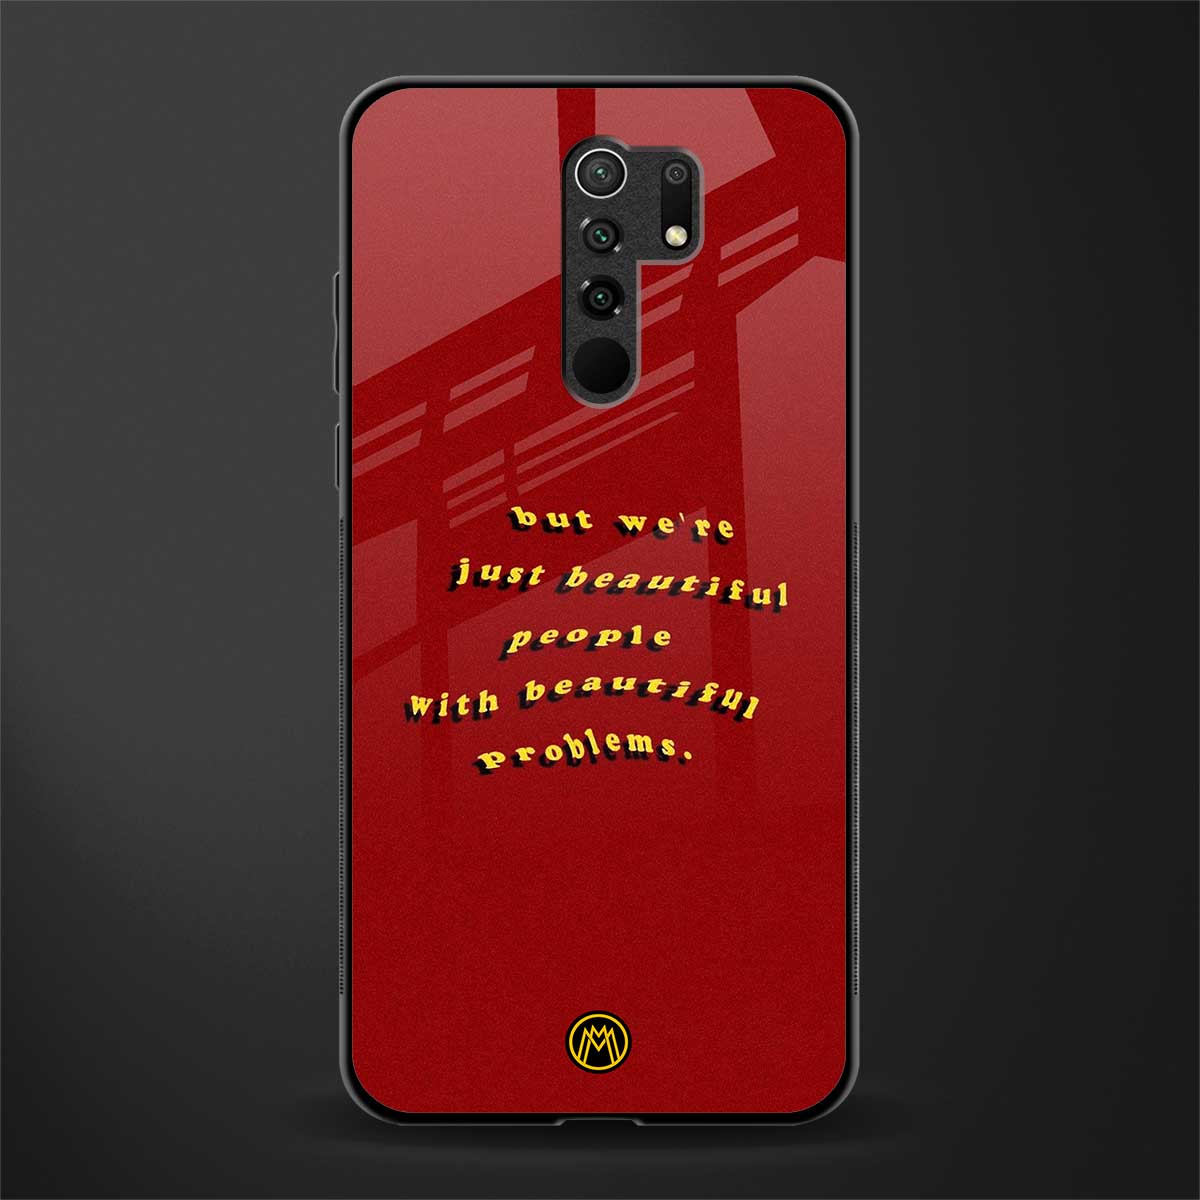 beautiful people with beautiful problems glass case for redmi 9 prime image